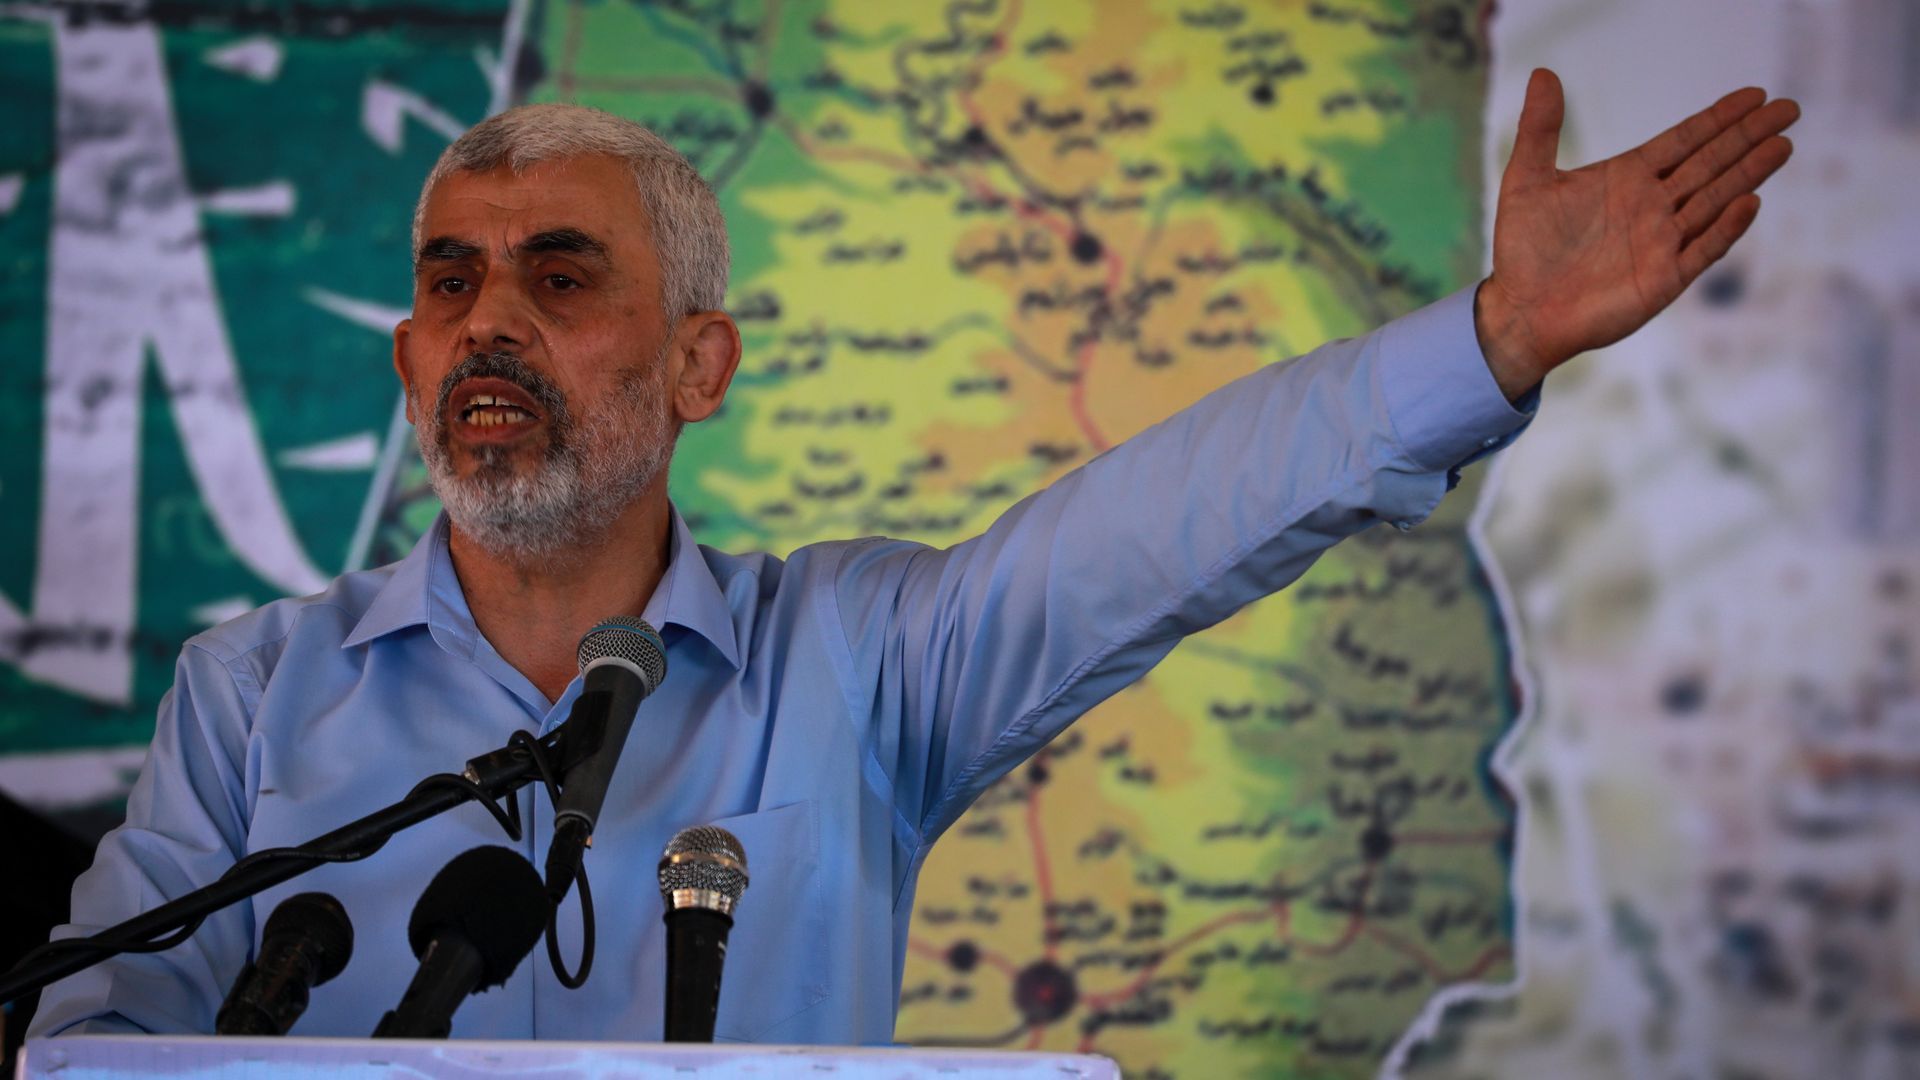 Hamas leader Yahya Sinwar speaks in Gaza City in 2021. He's now Israel's most-wanted person in Gaza. Photo: Majdi Fathi/NurPhoto via Getty Images